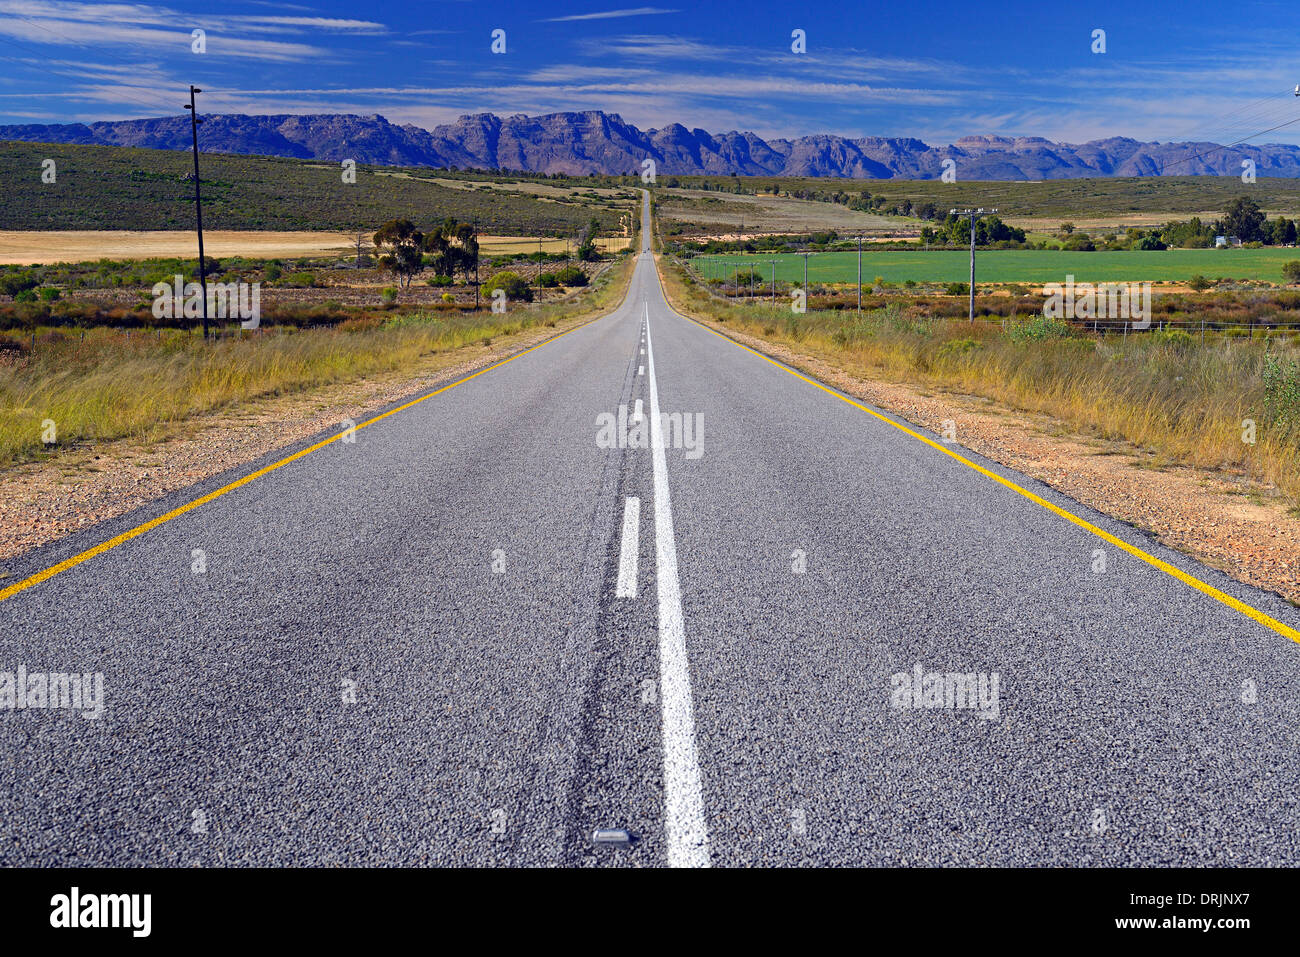 Street R364 between Lamberts Bay and Clanwilliam, in the background the Cederberge, west cape, western cape, South Africa, Afric Stock Photo